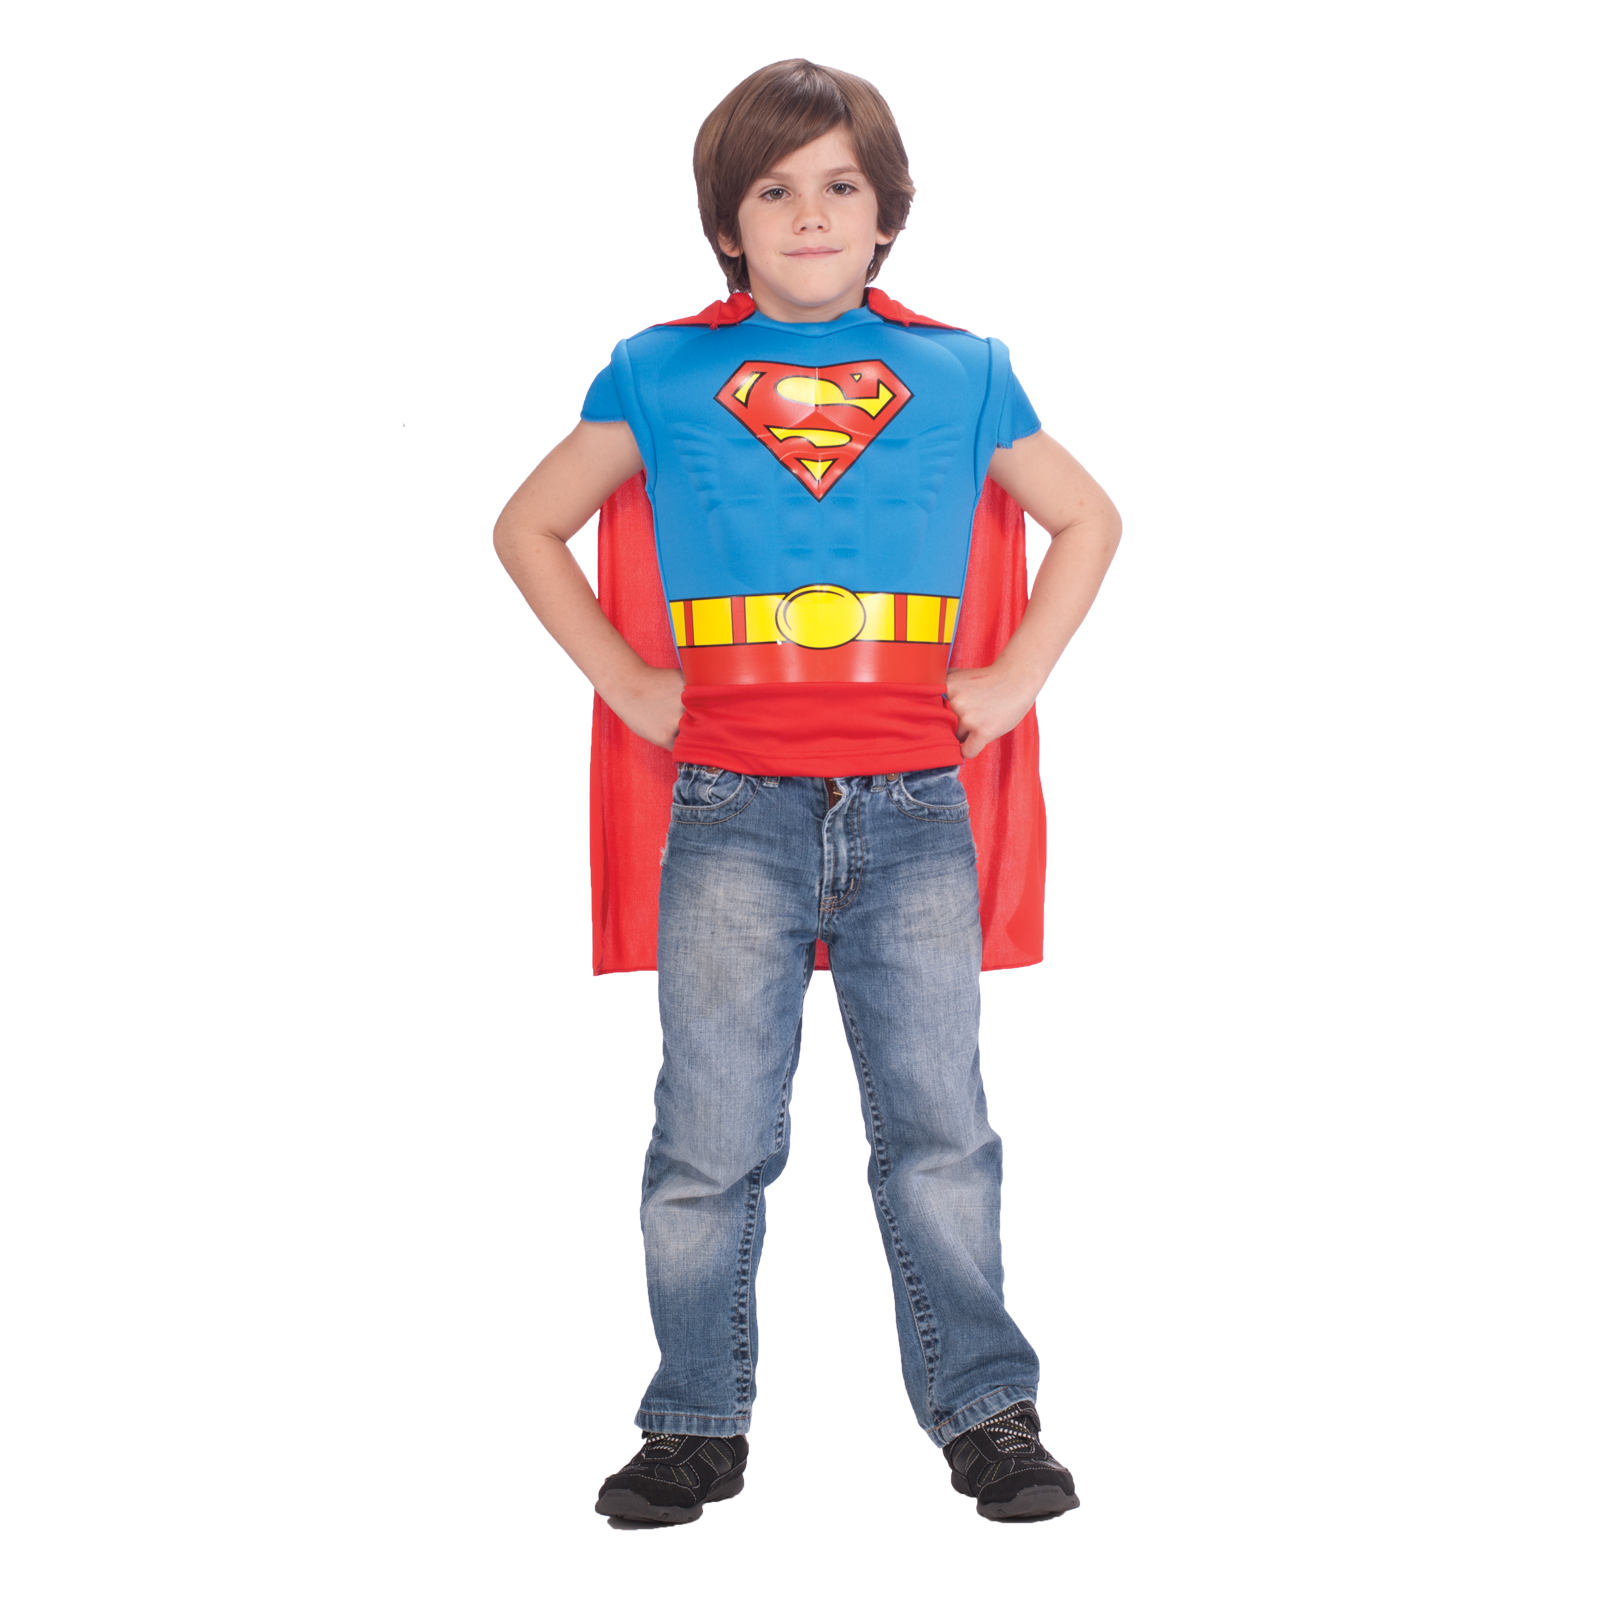 Boys Superman Muscle Shirt Halloween Costume Size: One Size Fits Most